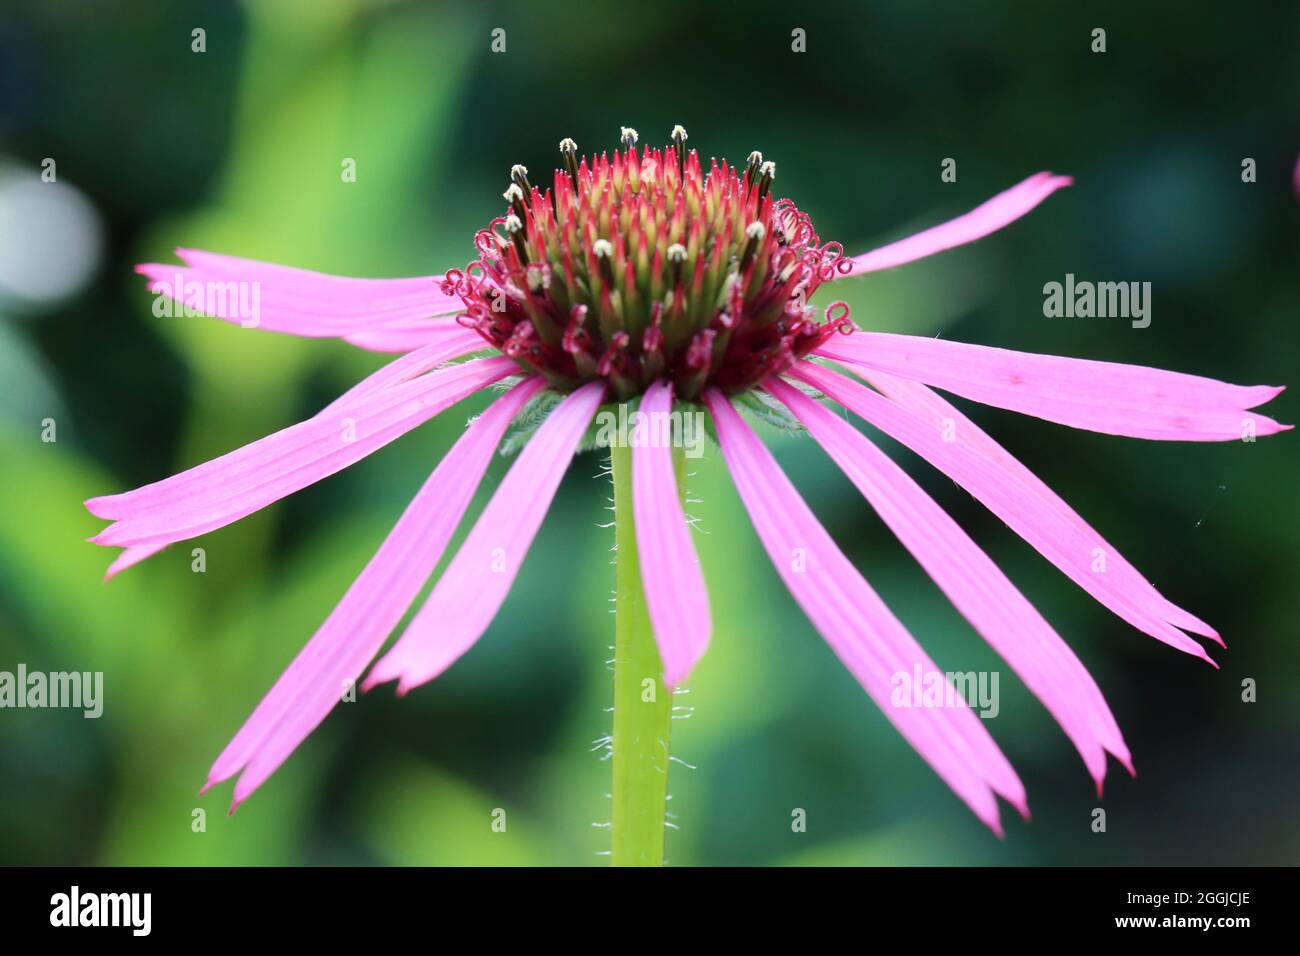 close-up of a delicate purple blossom of Echinacea angustifolia Stock Photo